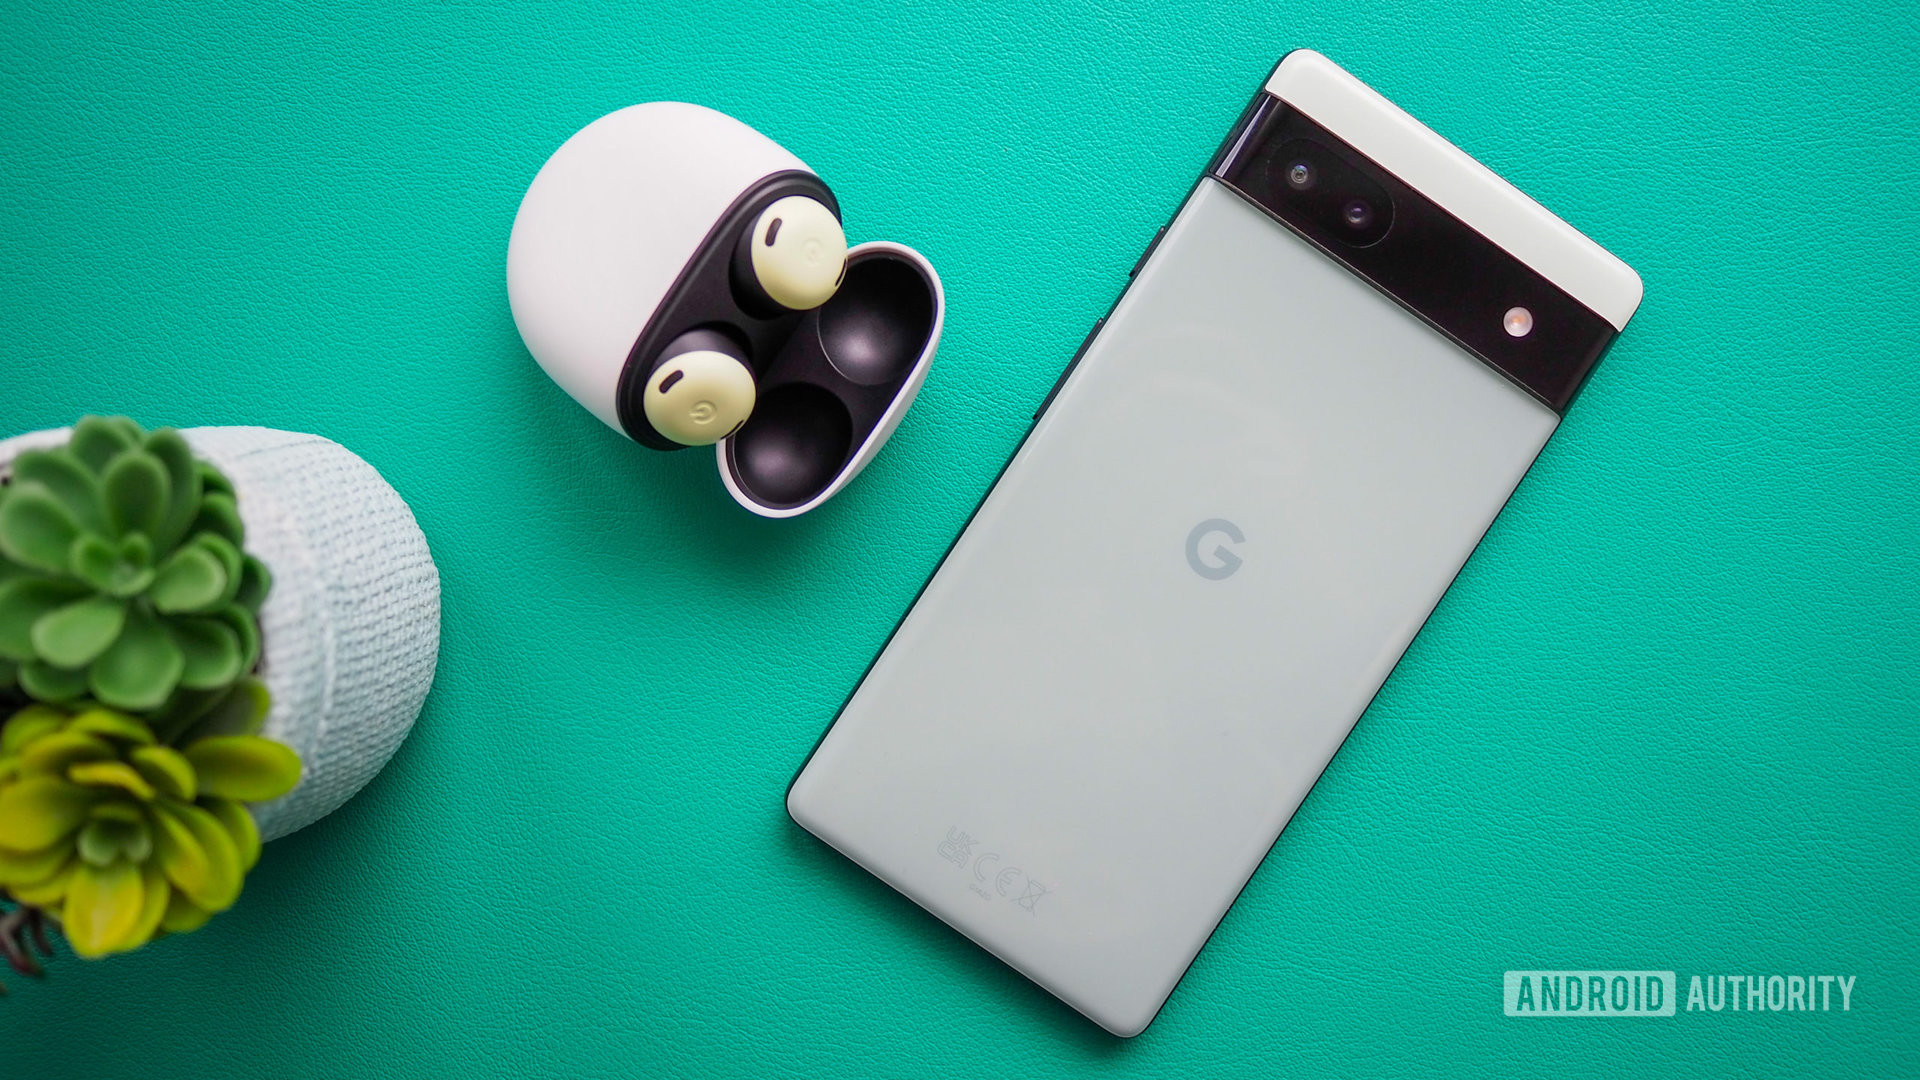 Google Pixel 6a in Sage color, seen from the back, next to Pixel Buds Pro, on a turquoise background